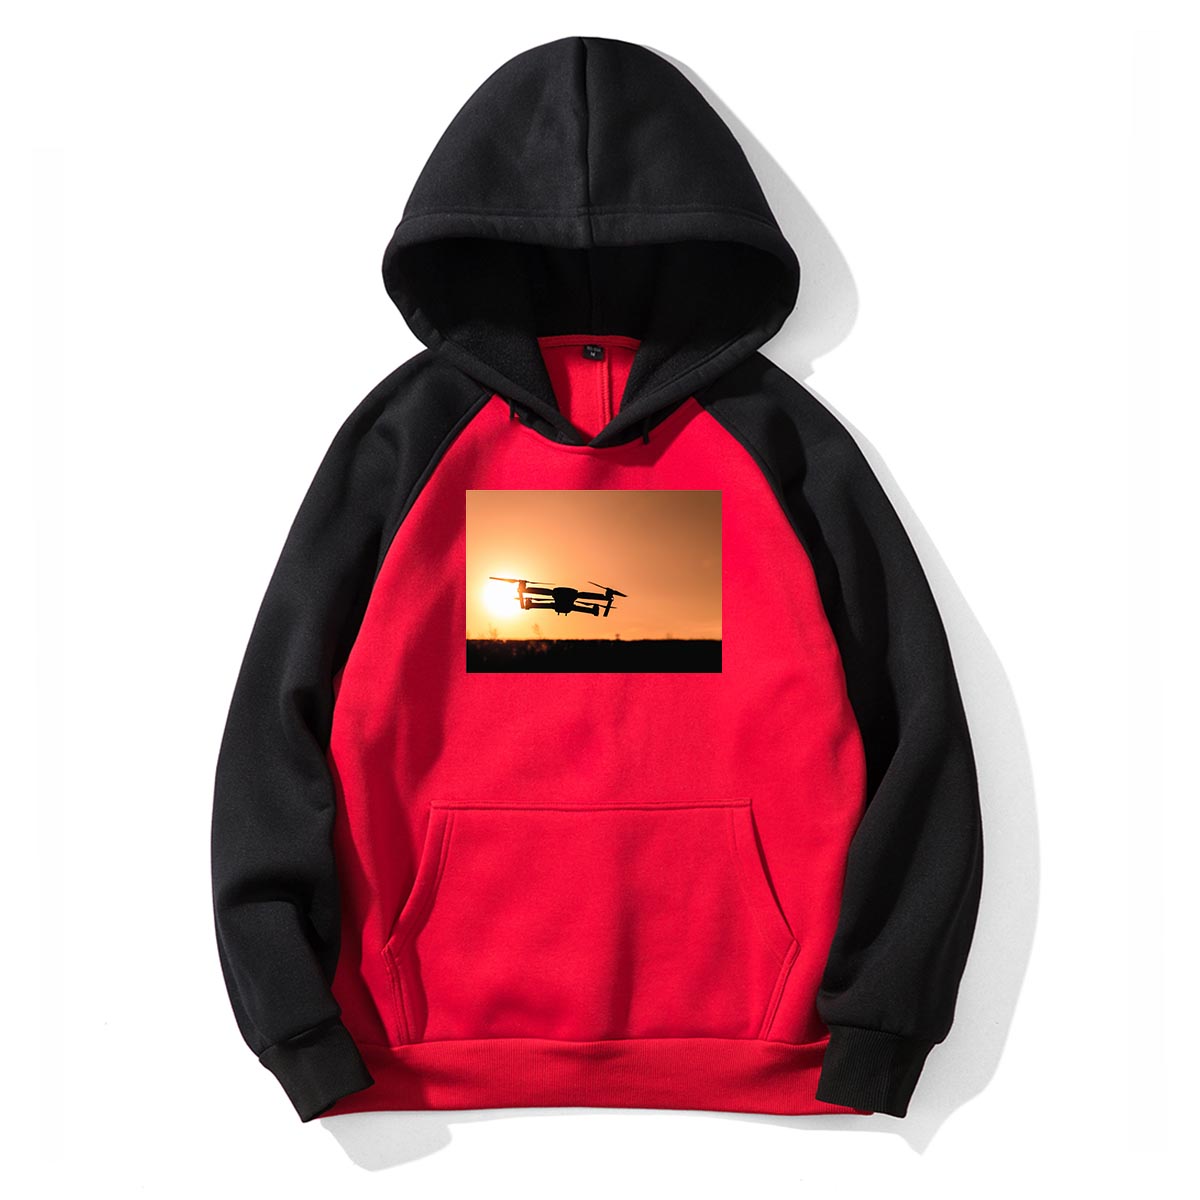 Amazing Drone in Sunset Designed Colourful Hoodies